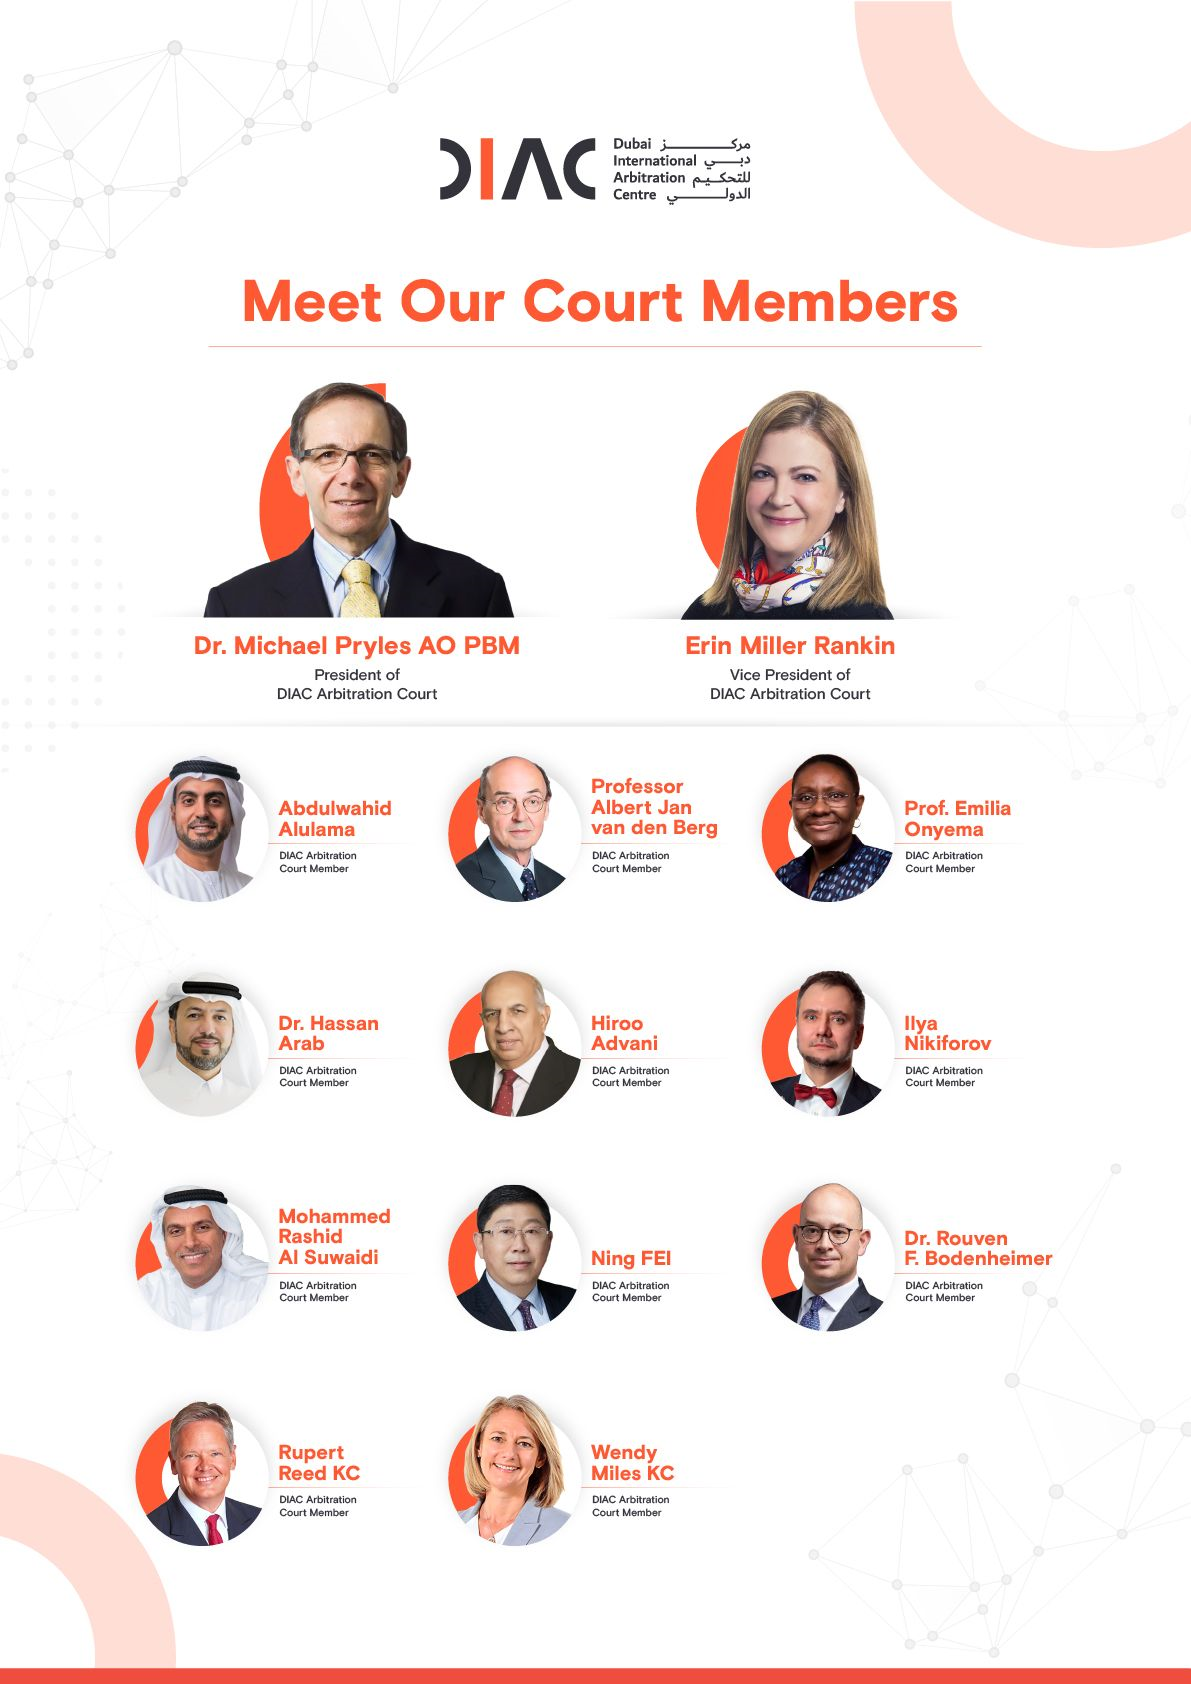 Dubai International Arbitration Centre (DIAC) Reforms Its Arbitration Court, Appointing Reputable Arbitration Experts with Diverse Expertise from Around the World